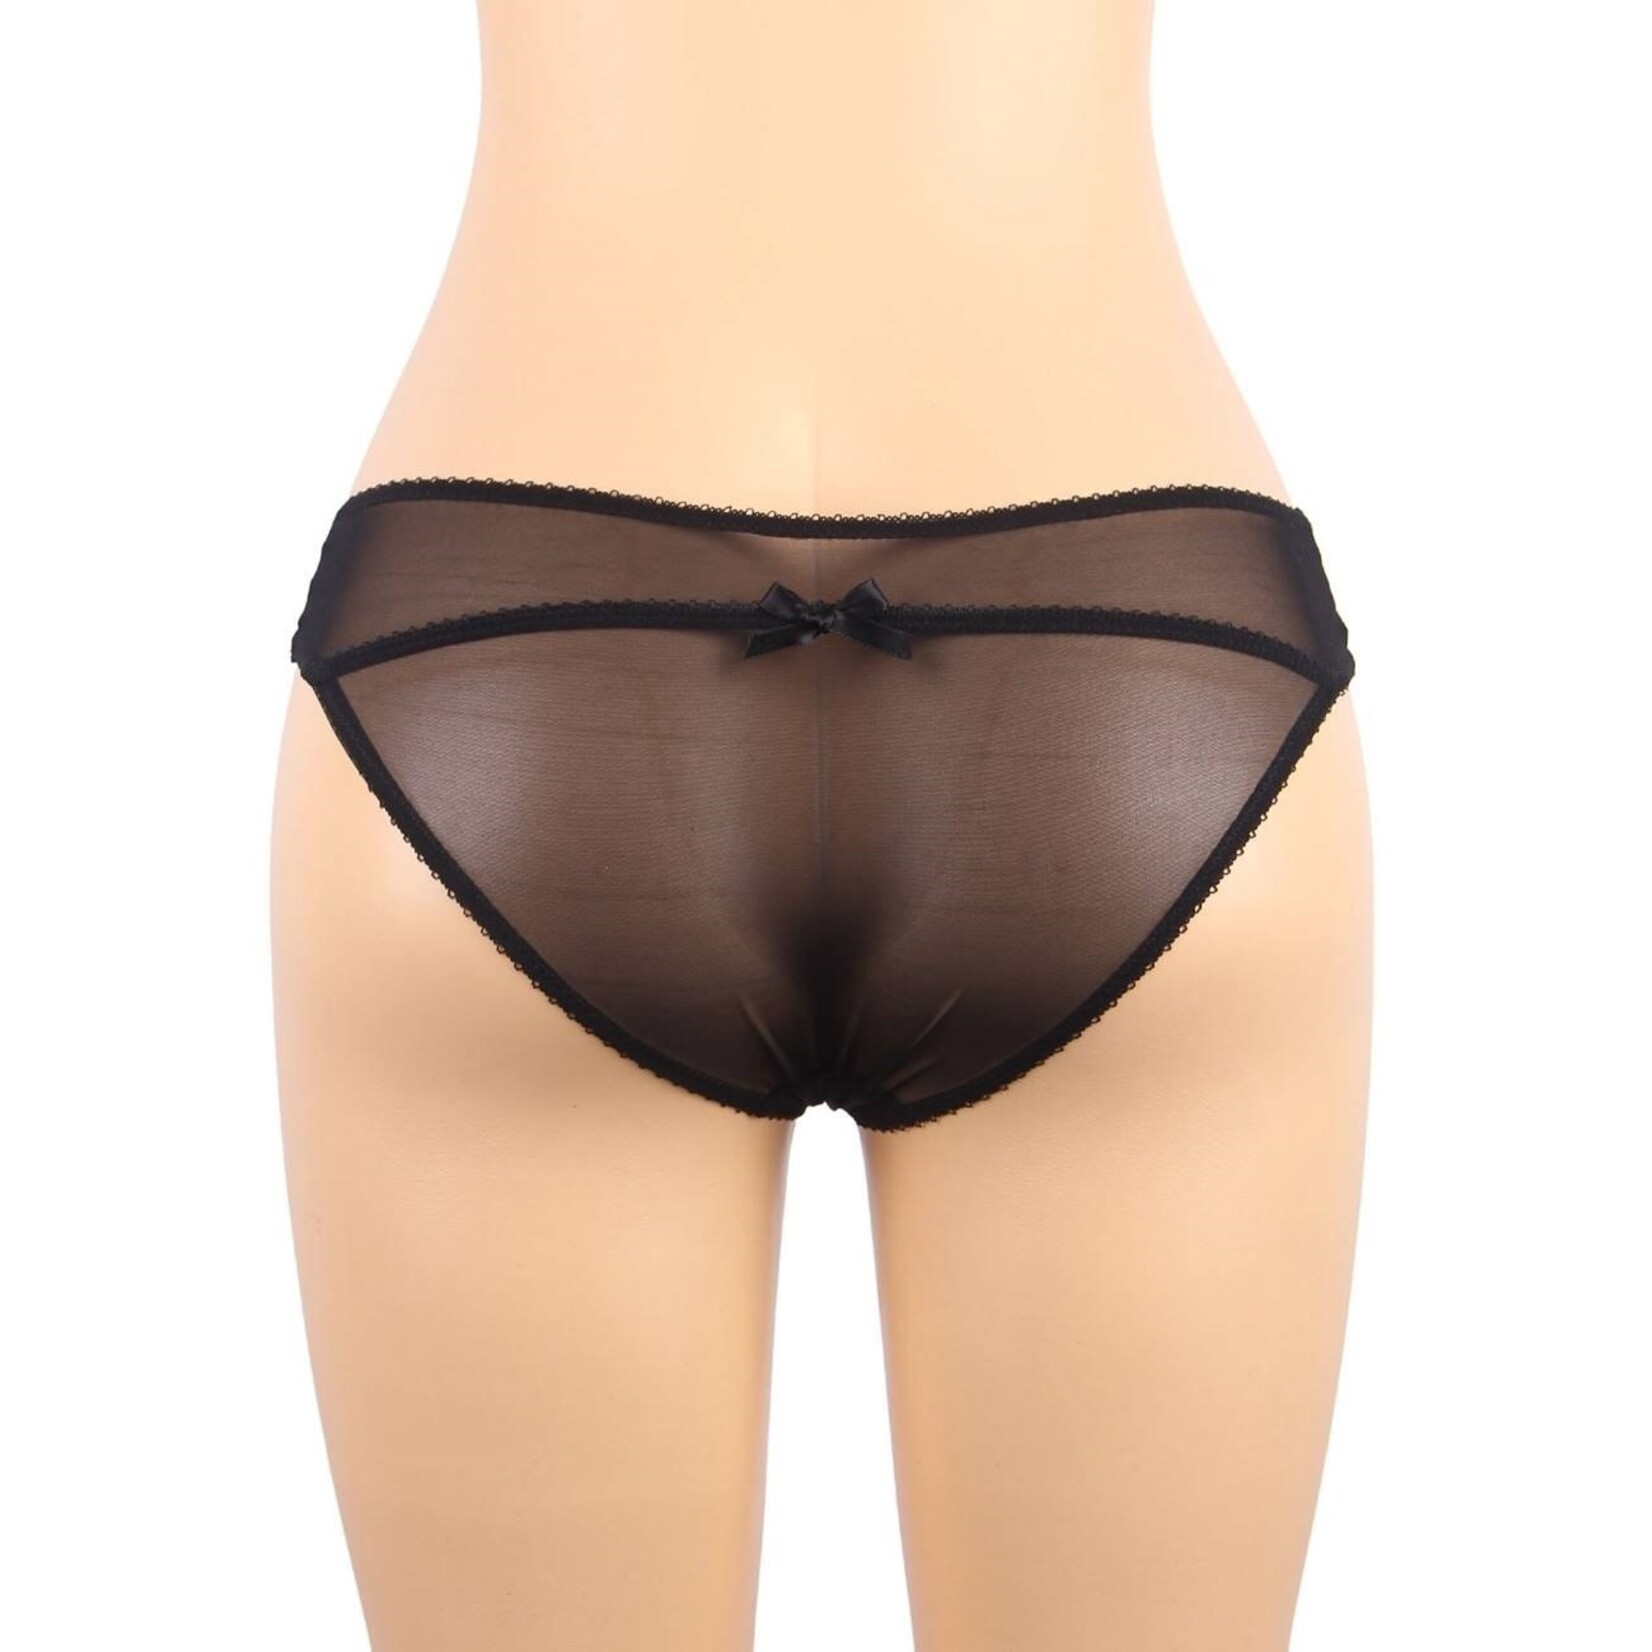 OH YEAH! -  SEXY EXQUISITE LACE PLUS SIZE GARTER PANTY XL-2XL